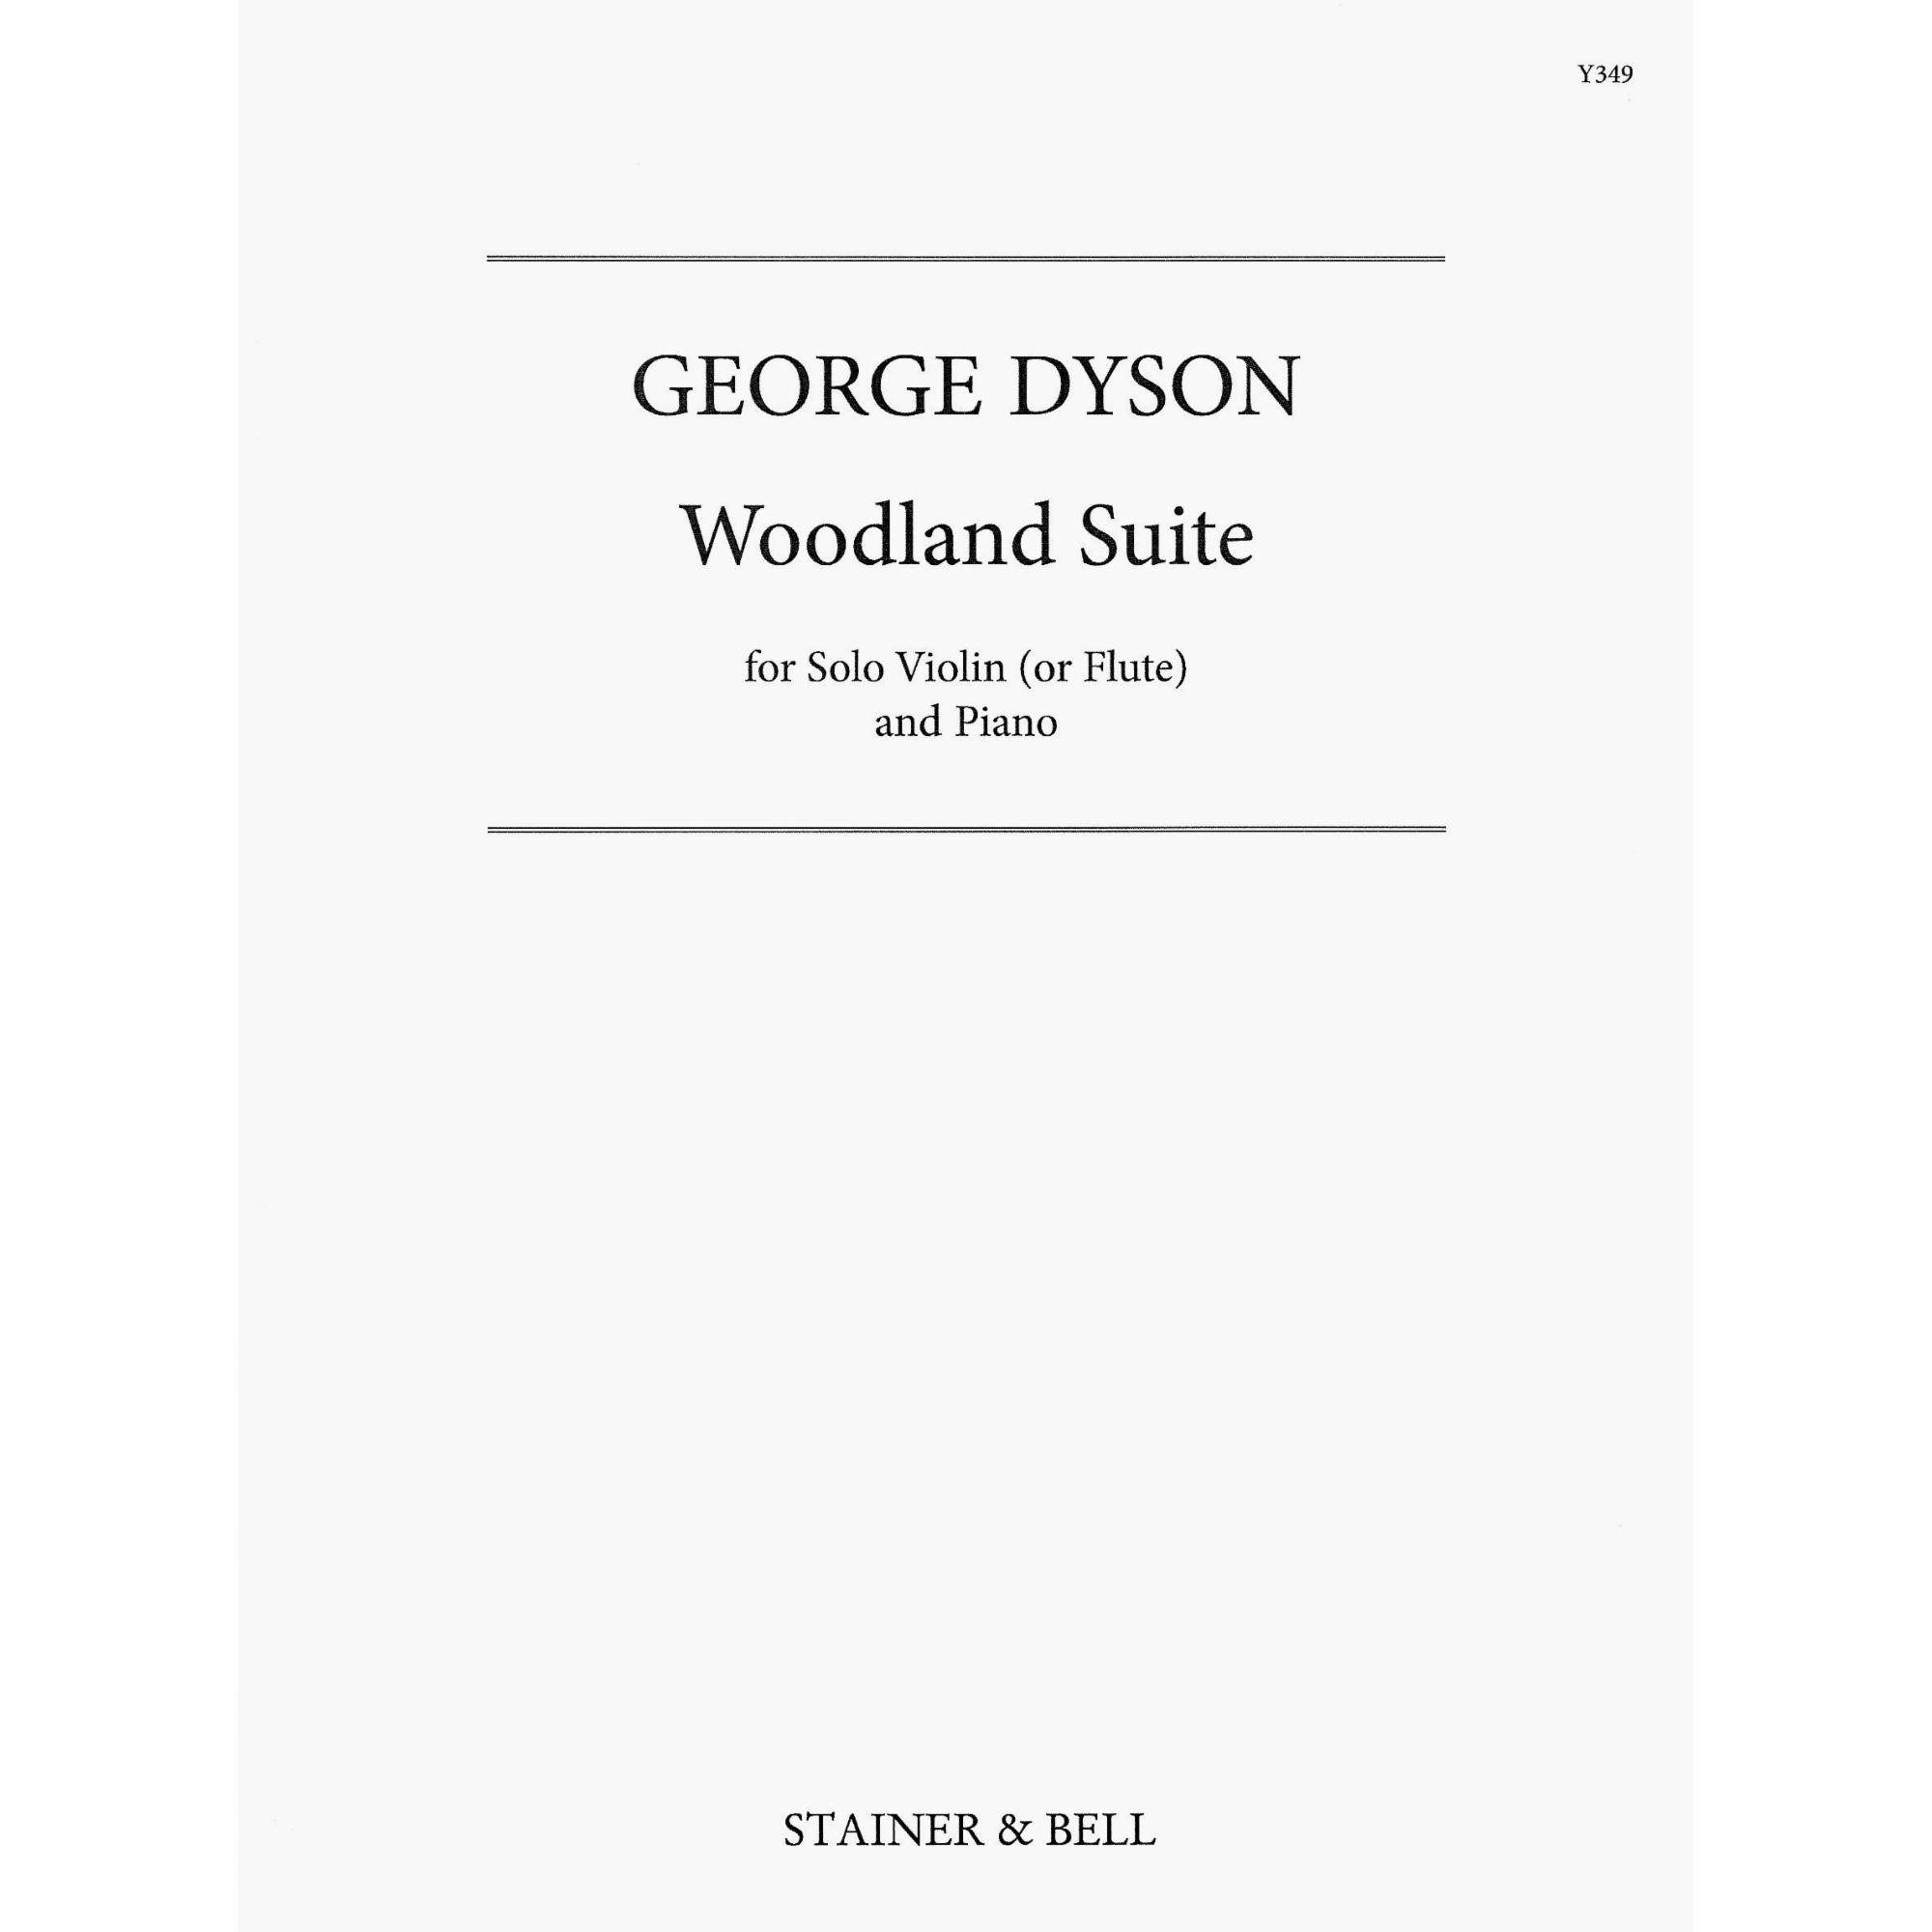 Dyson -- Woodland Suite for Violin and Piano